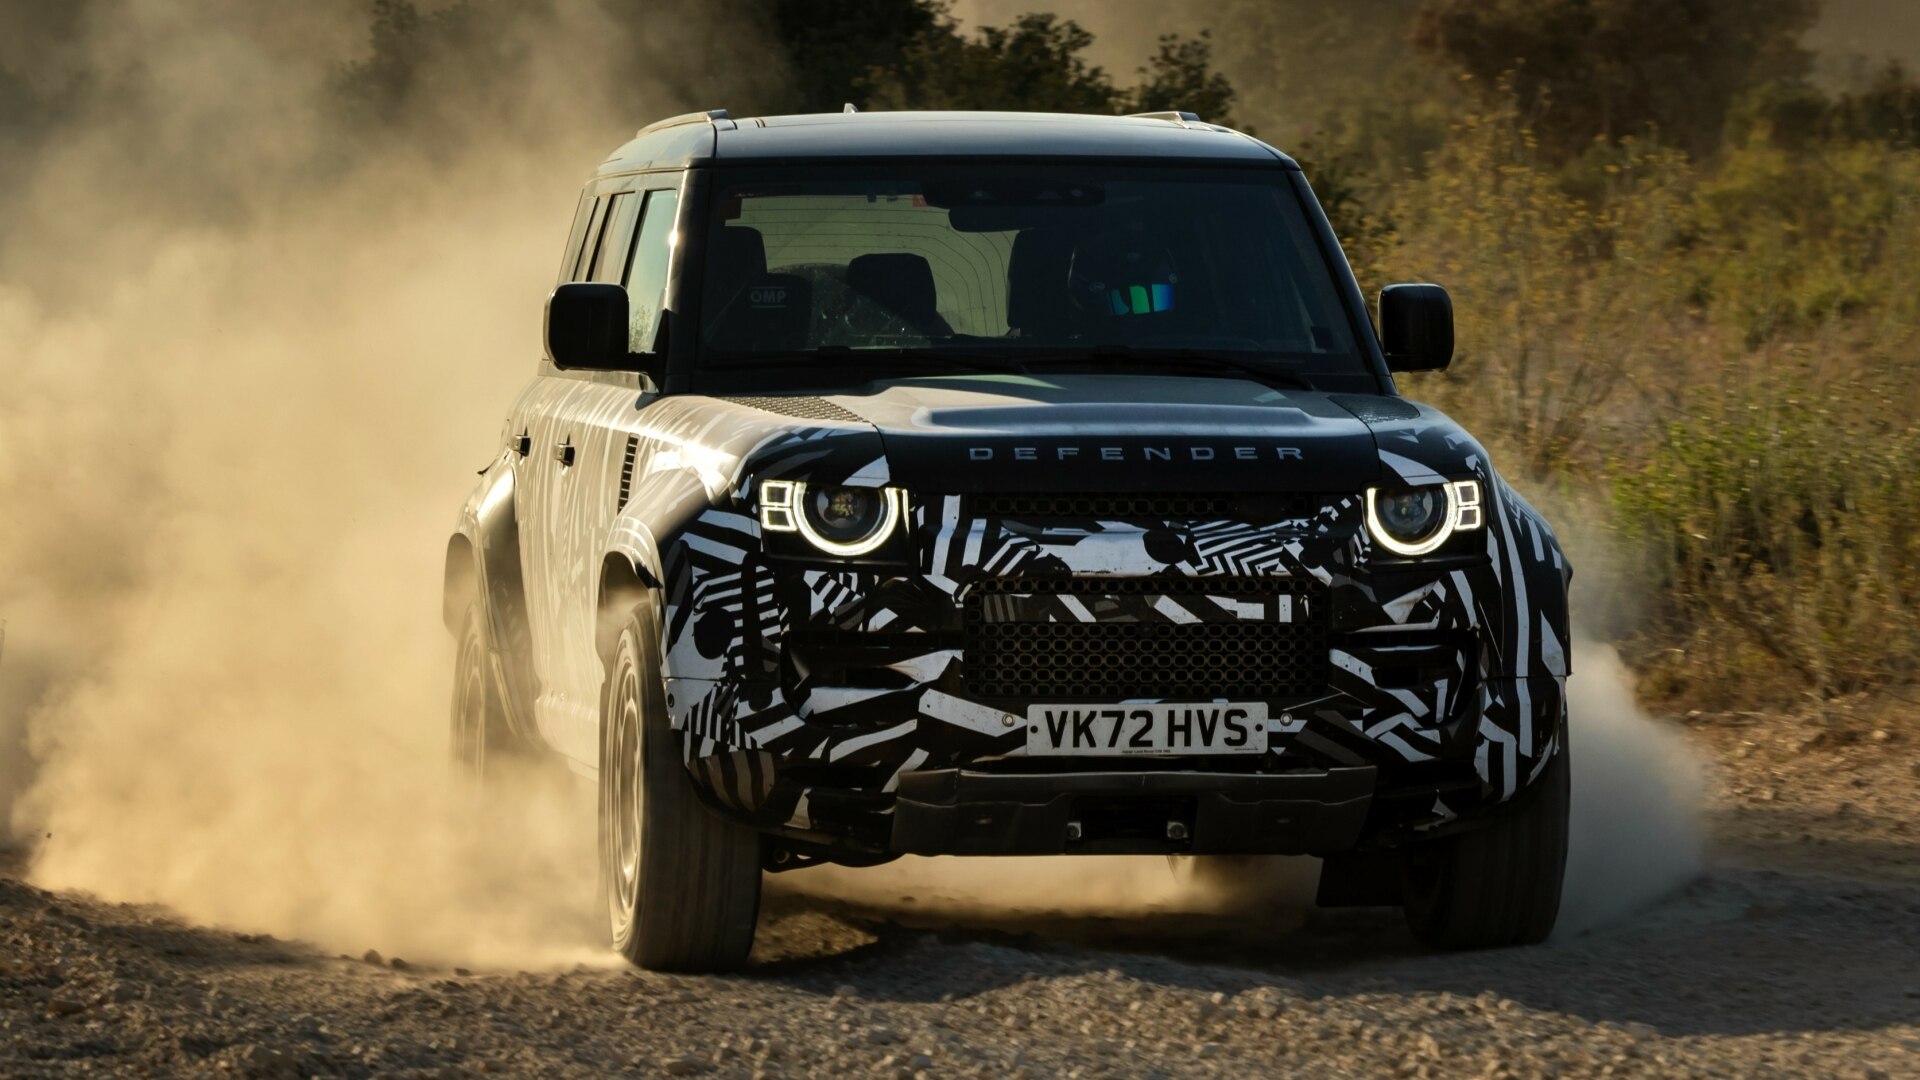 The Front Profile Of The New Land Rover Defender Octa (Credits Land Rover Media)